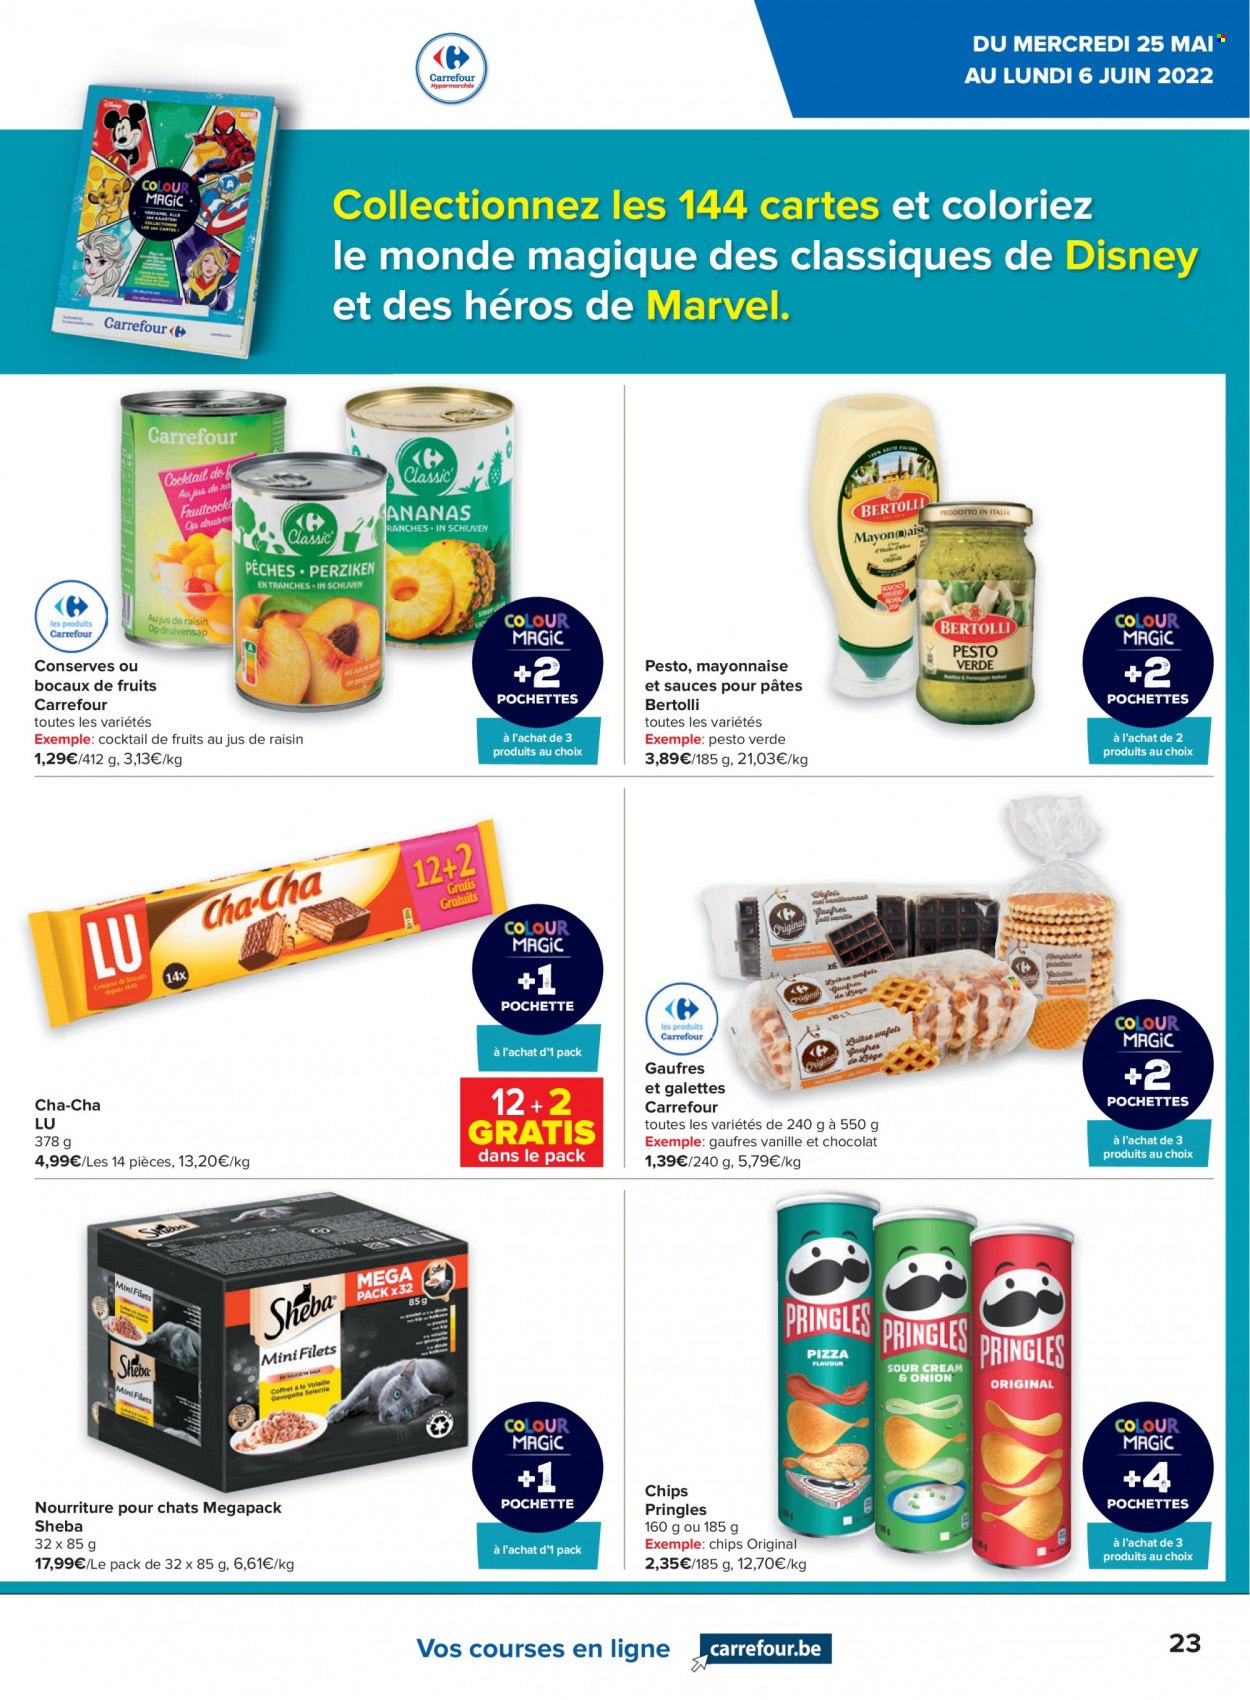 Catalogue Carrefour hypermarkt - 25.5.2022 - 31.5.2022. Page 23.